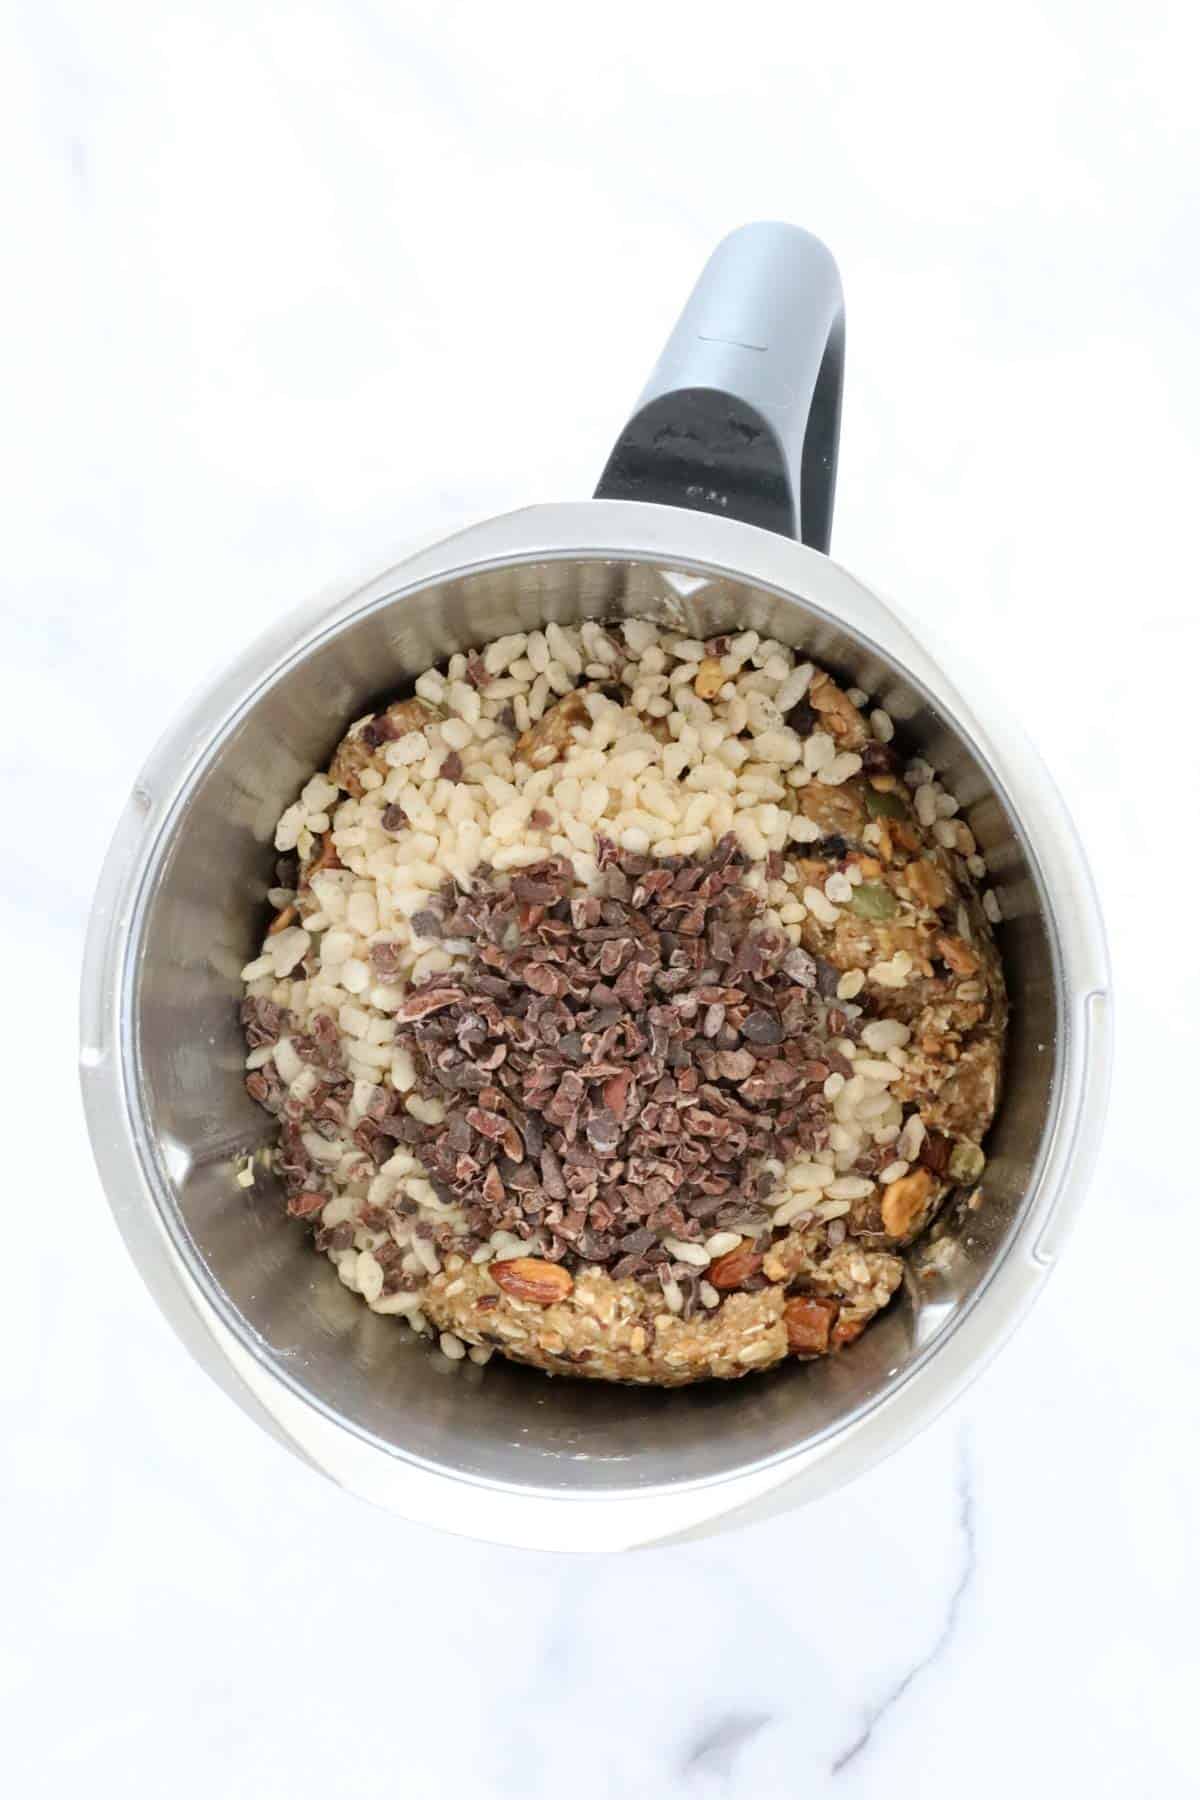 Puffed rice and cacao nibs in a Thermomix.